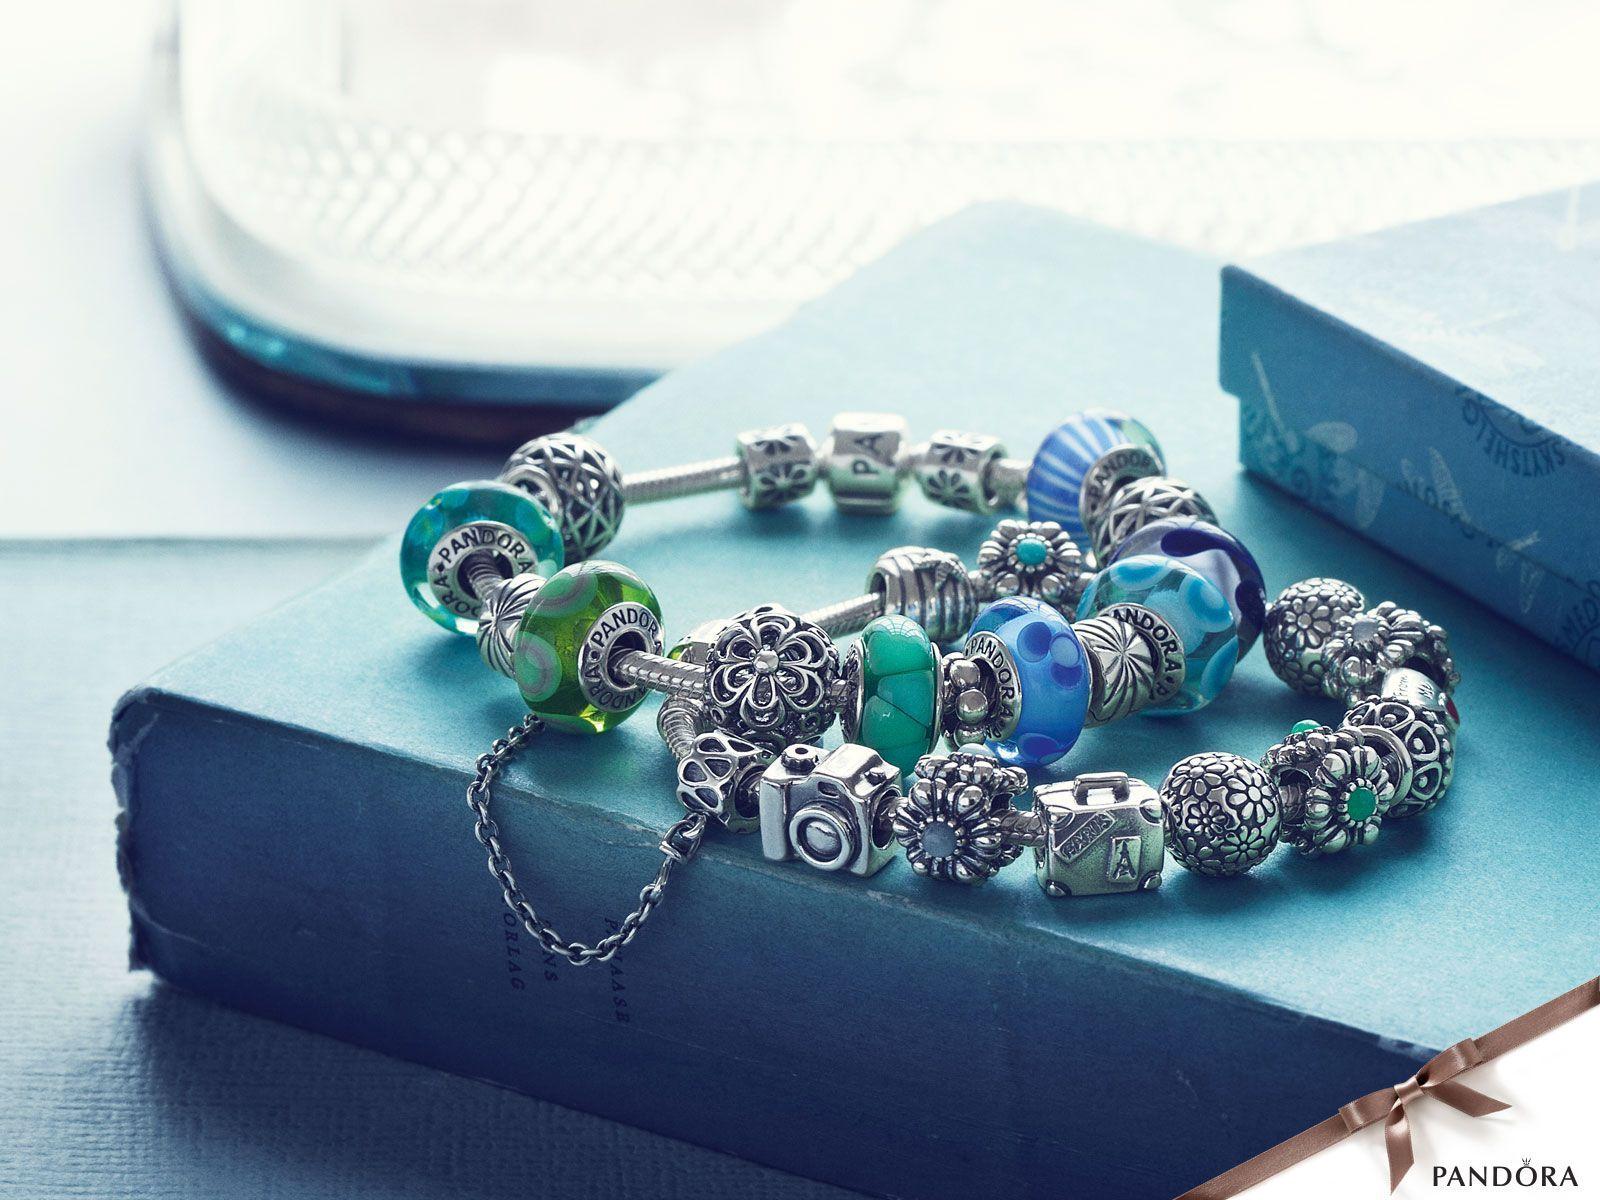 Teal and turquoise Pandora bracelets. Beautiful!. For the Wrist